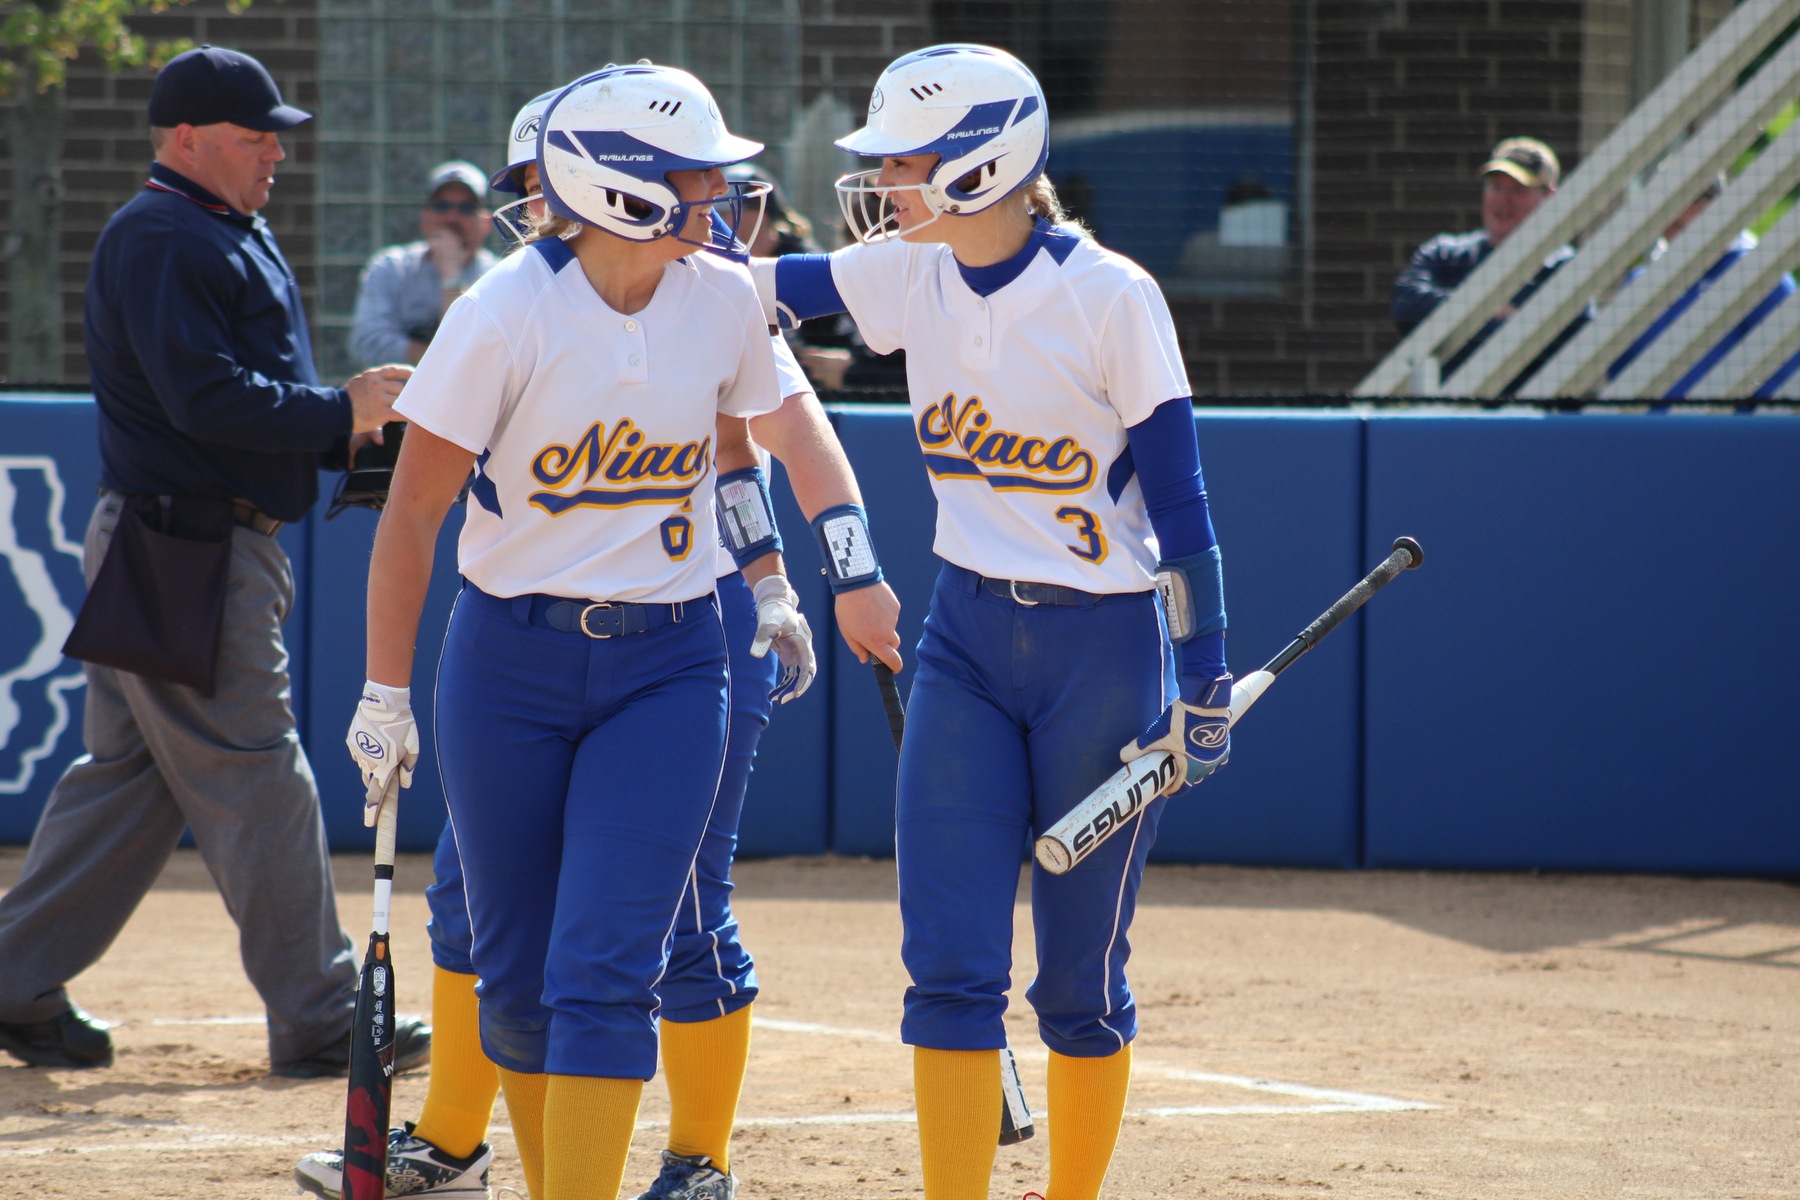 Morgan Kelley (left) gets congratulated by Hannah Faktor after hitting a solo home run in the fourth inning.